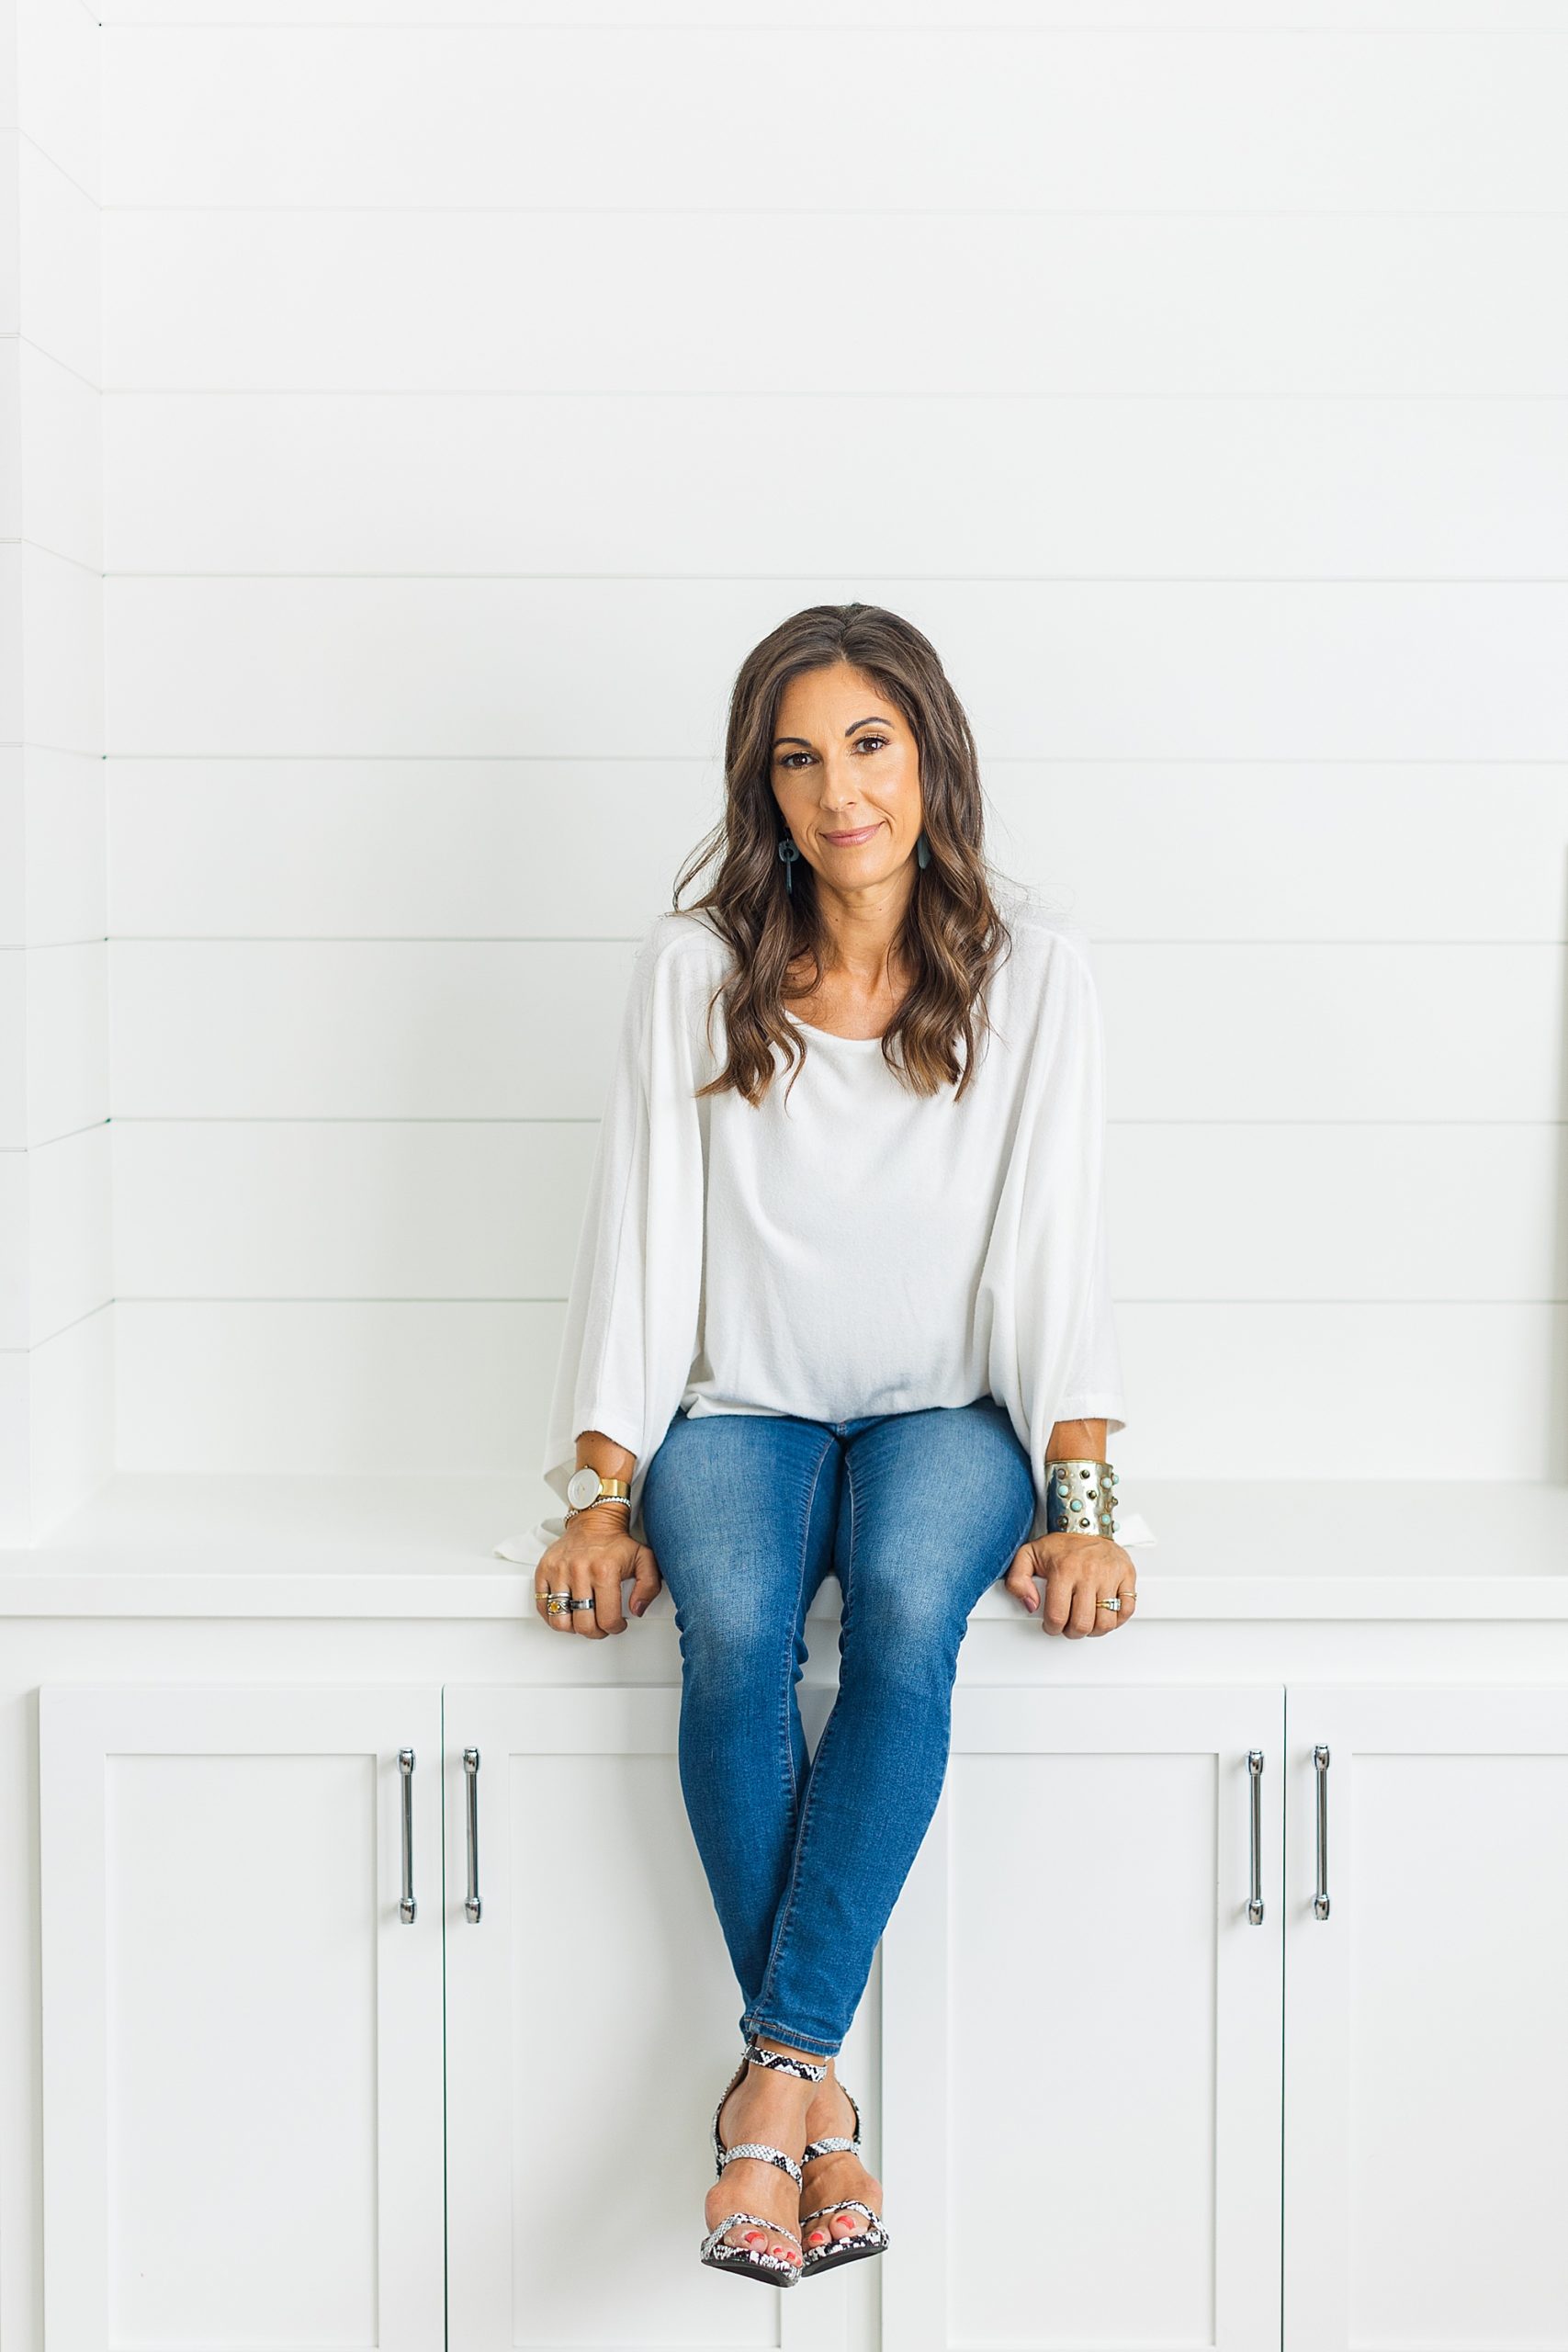 health coach sits on white table during branding photos